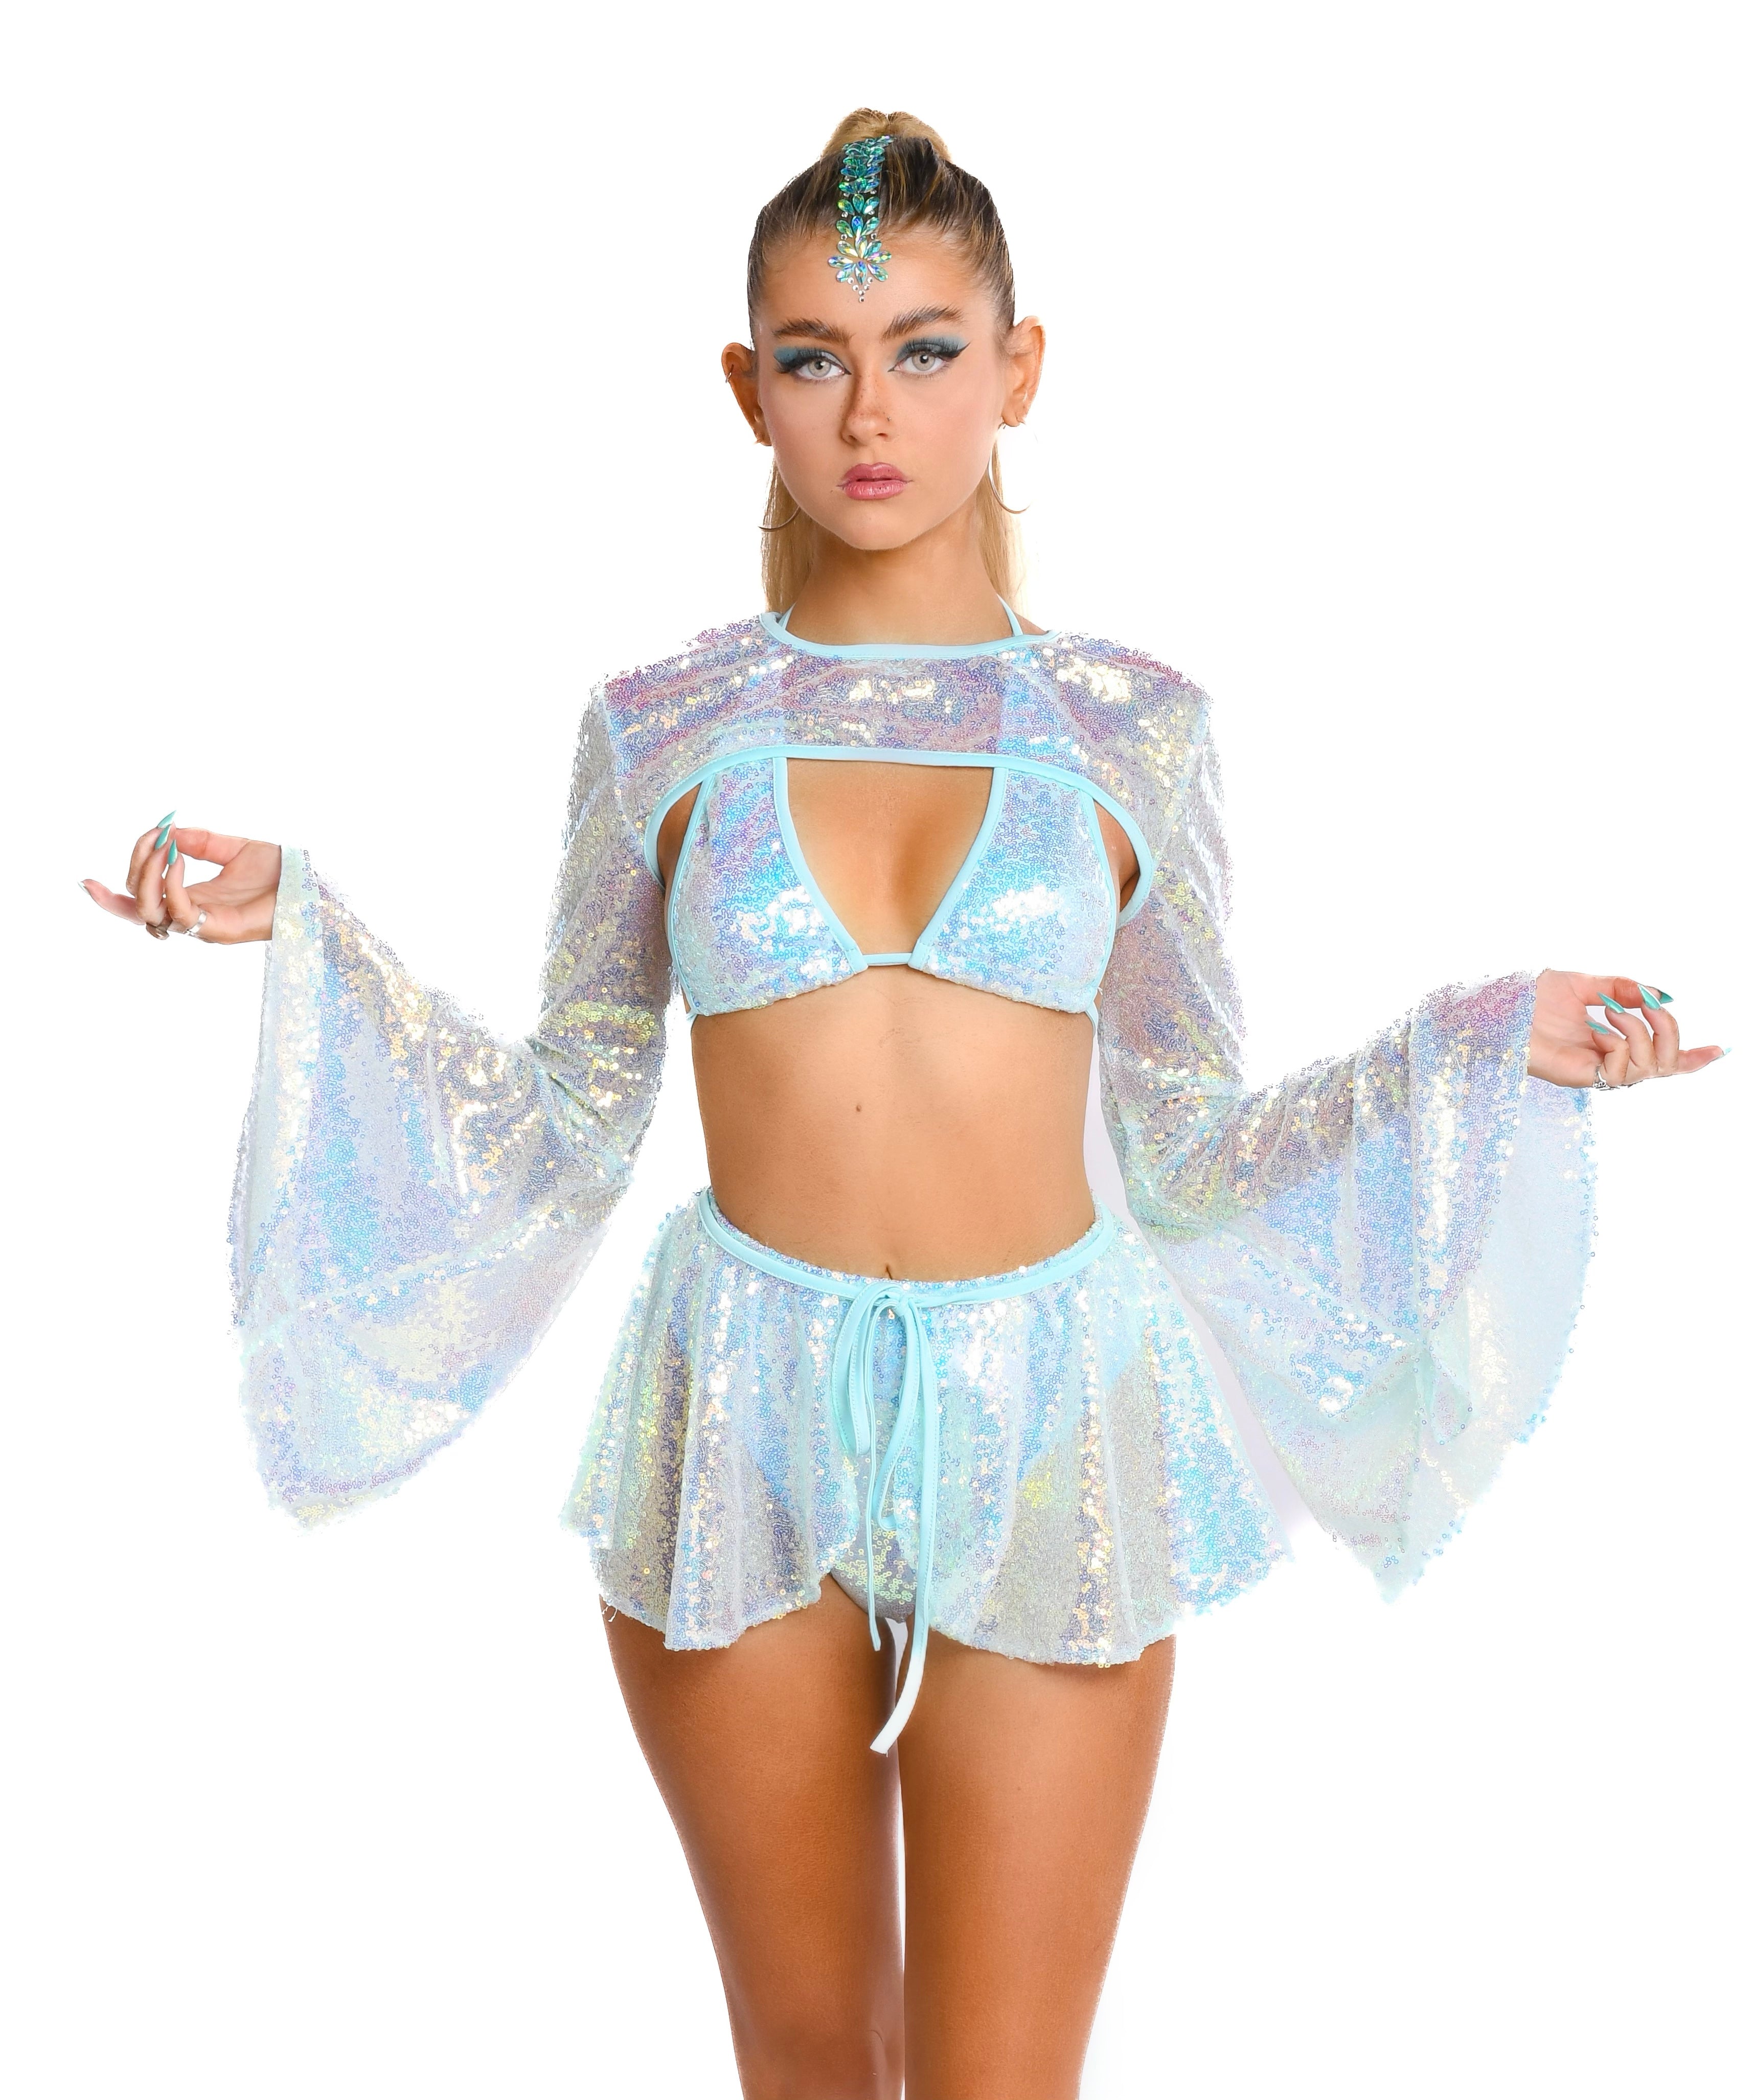 LILAC Constellation RAVE OUTFIT with flared sleeves (4 piece set